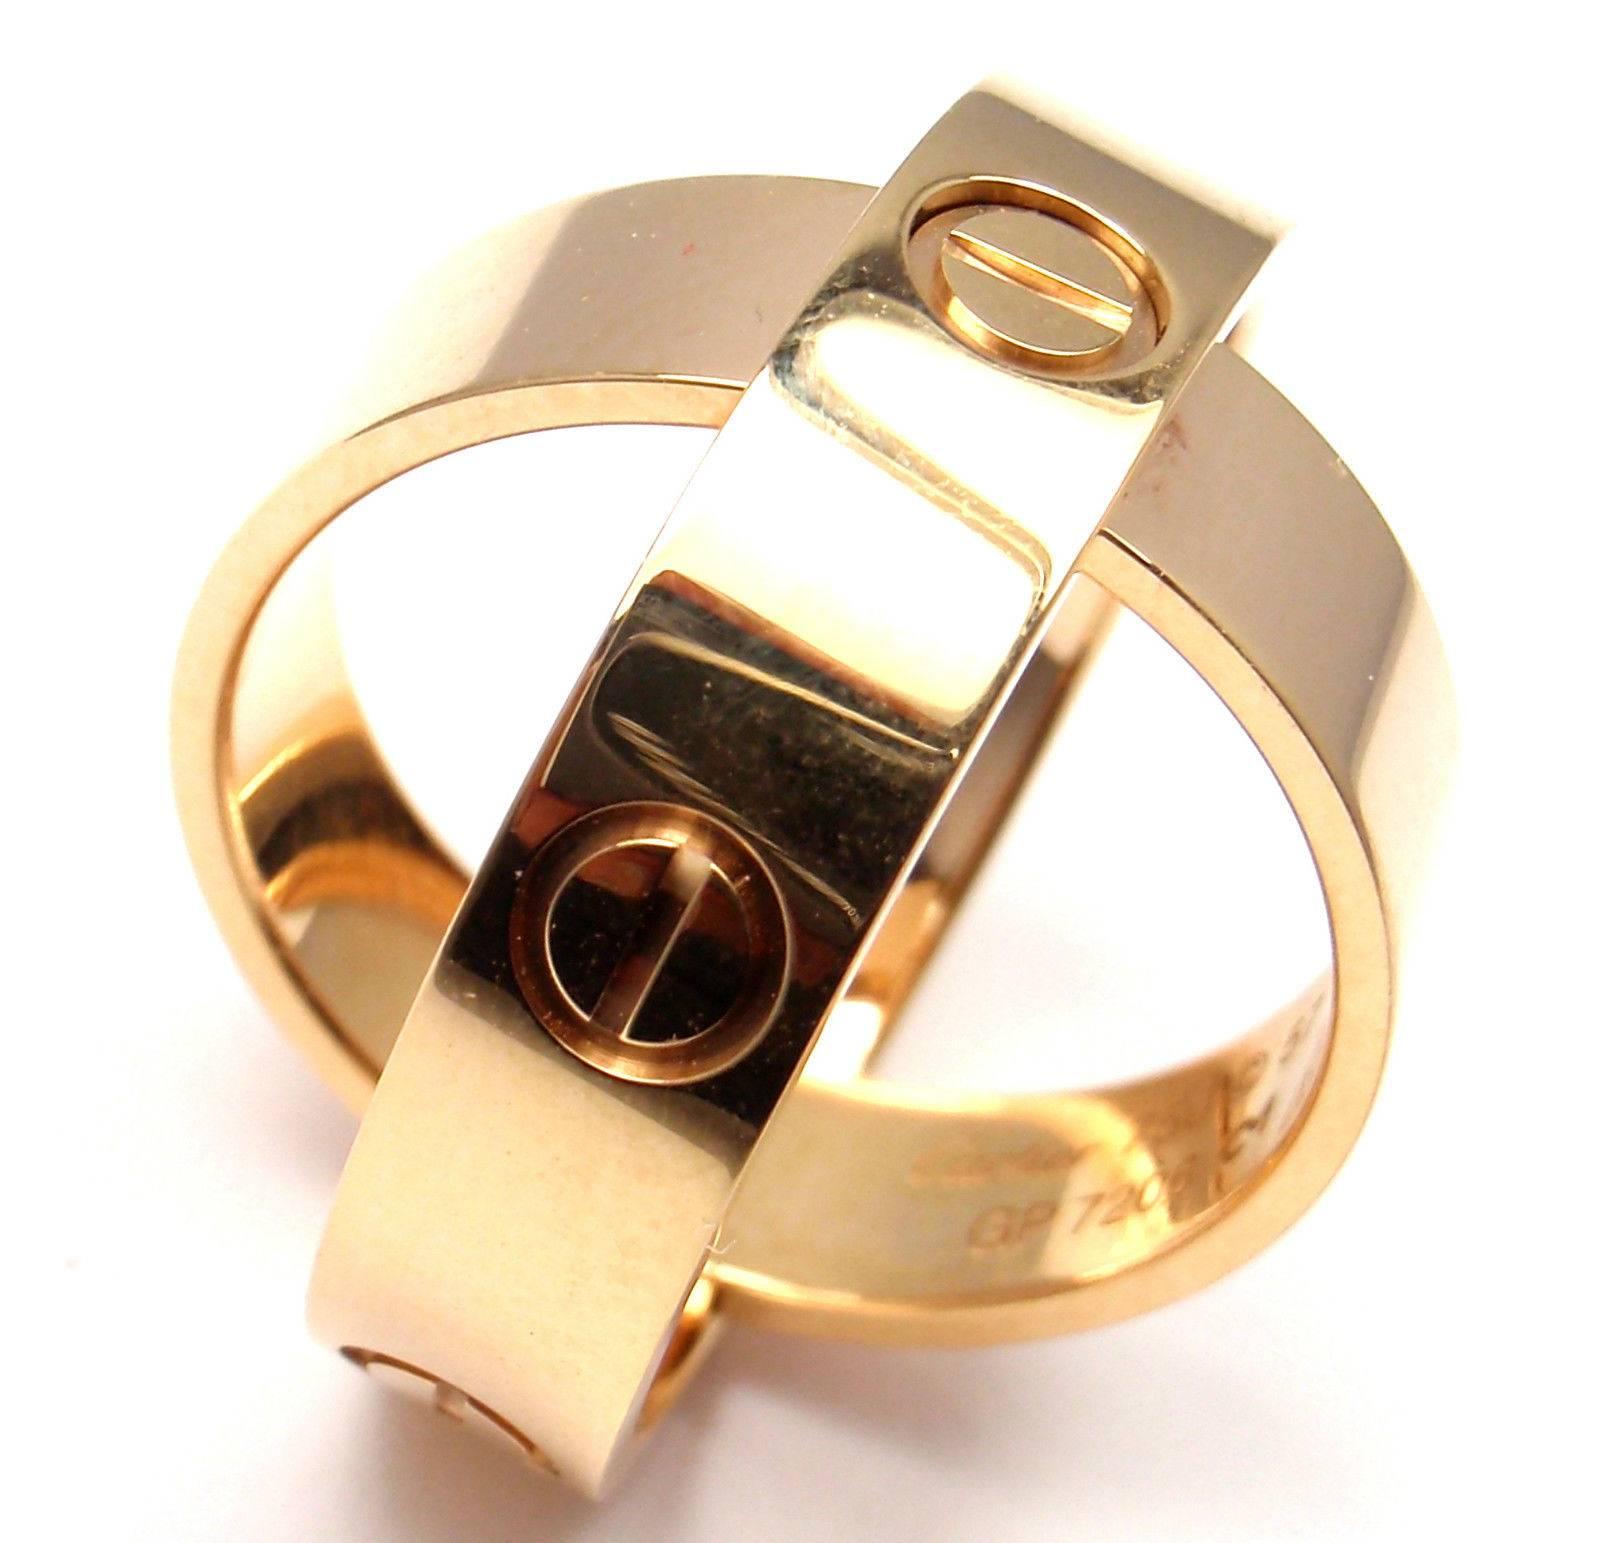 18k Yellow Gold Combination Love Band Ring and Pendant by Cartier.
This ring is in mint condition and comes with Cartier box and Cartier certificate.

 Details:
Ring Size: European 57 US 8
Band Width: 6mm
Weight: 11.5 grams
Stamped Hallmarks: